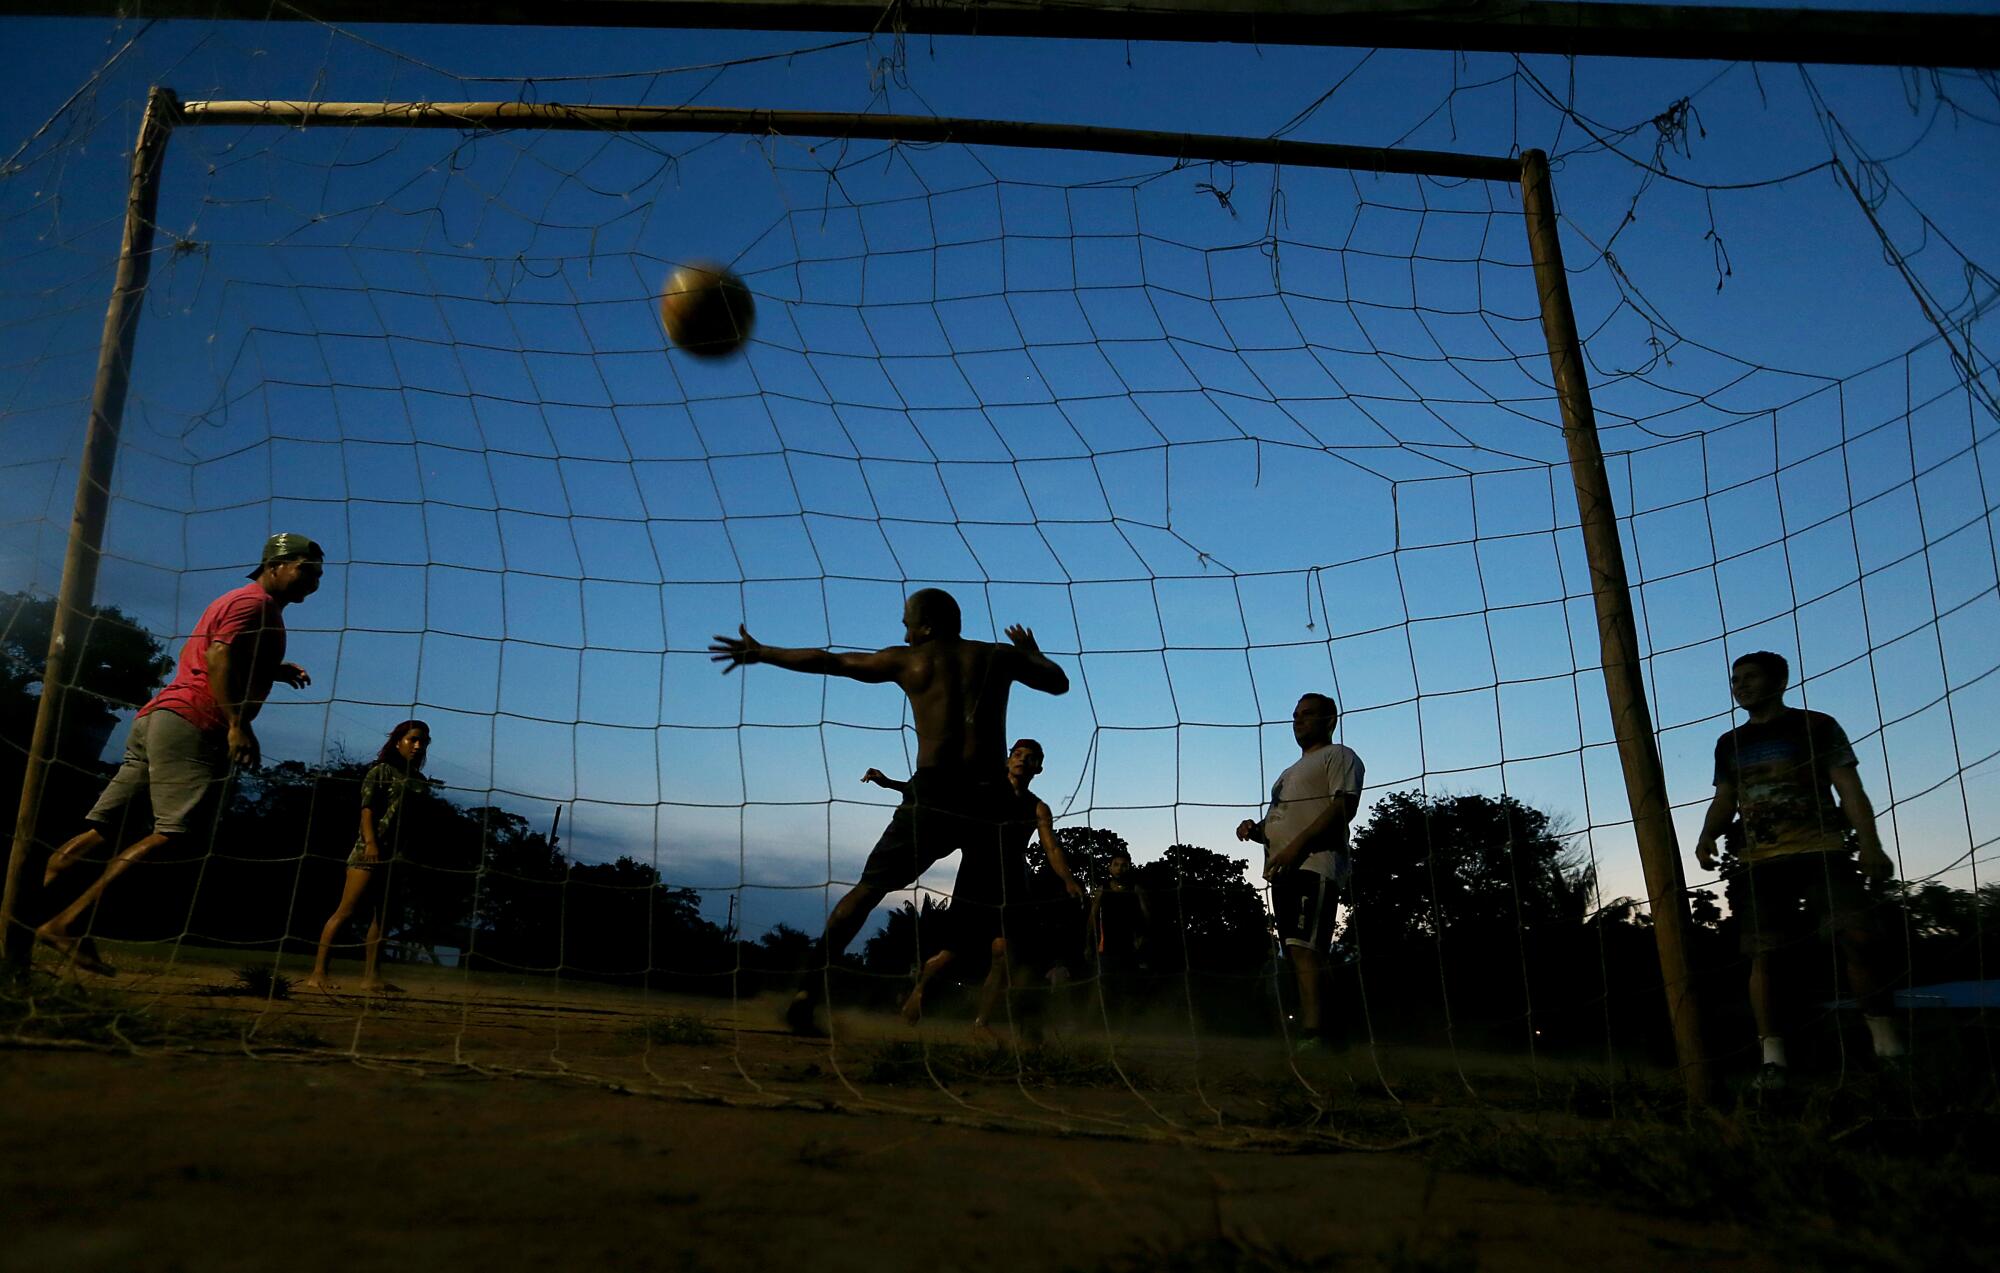 Residents of Tumbira, Brazil, play soccer as the sun sets